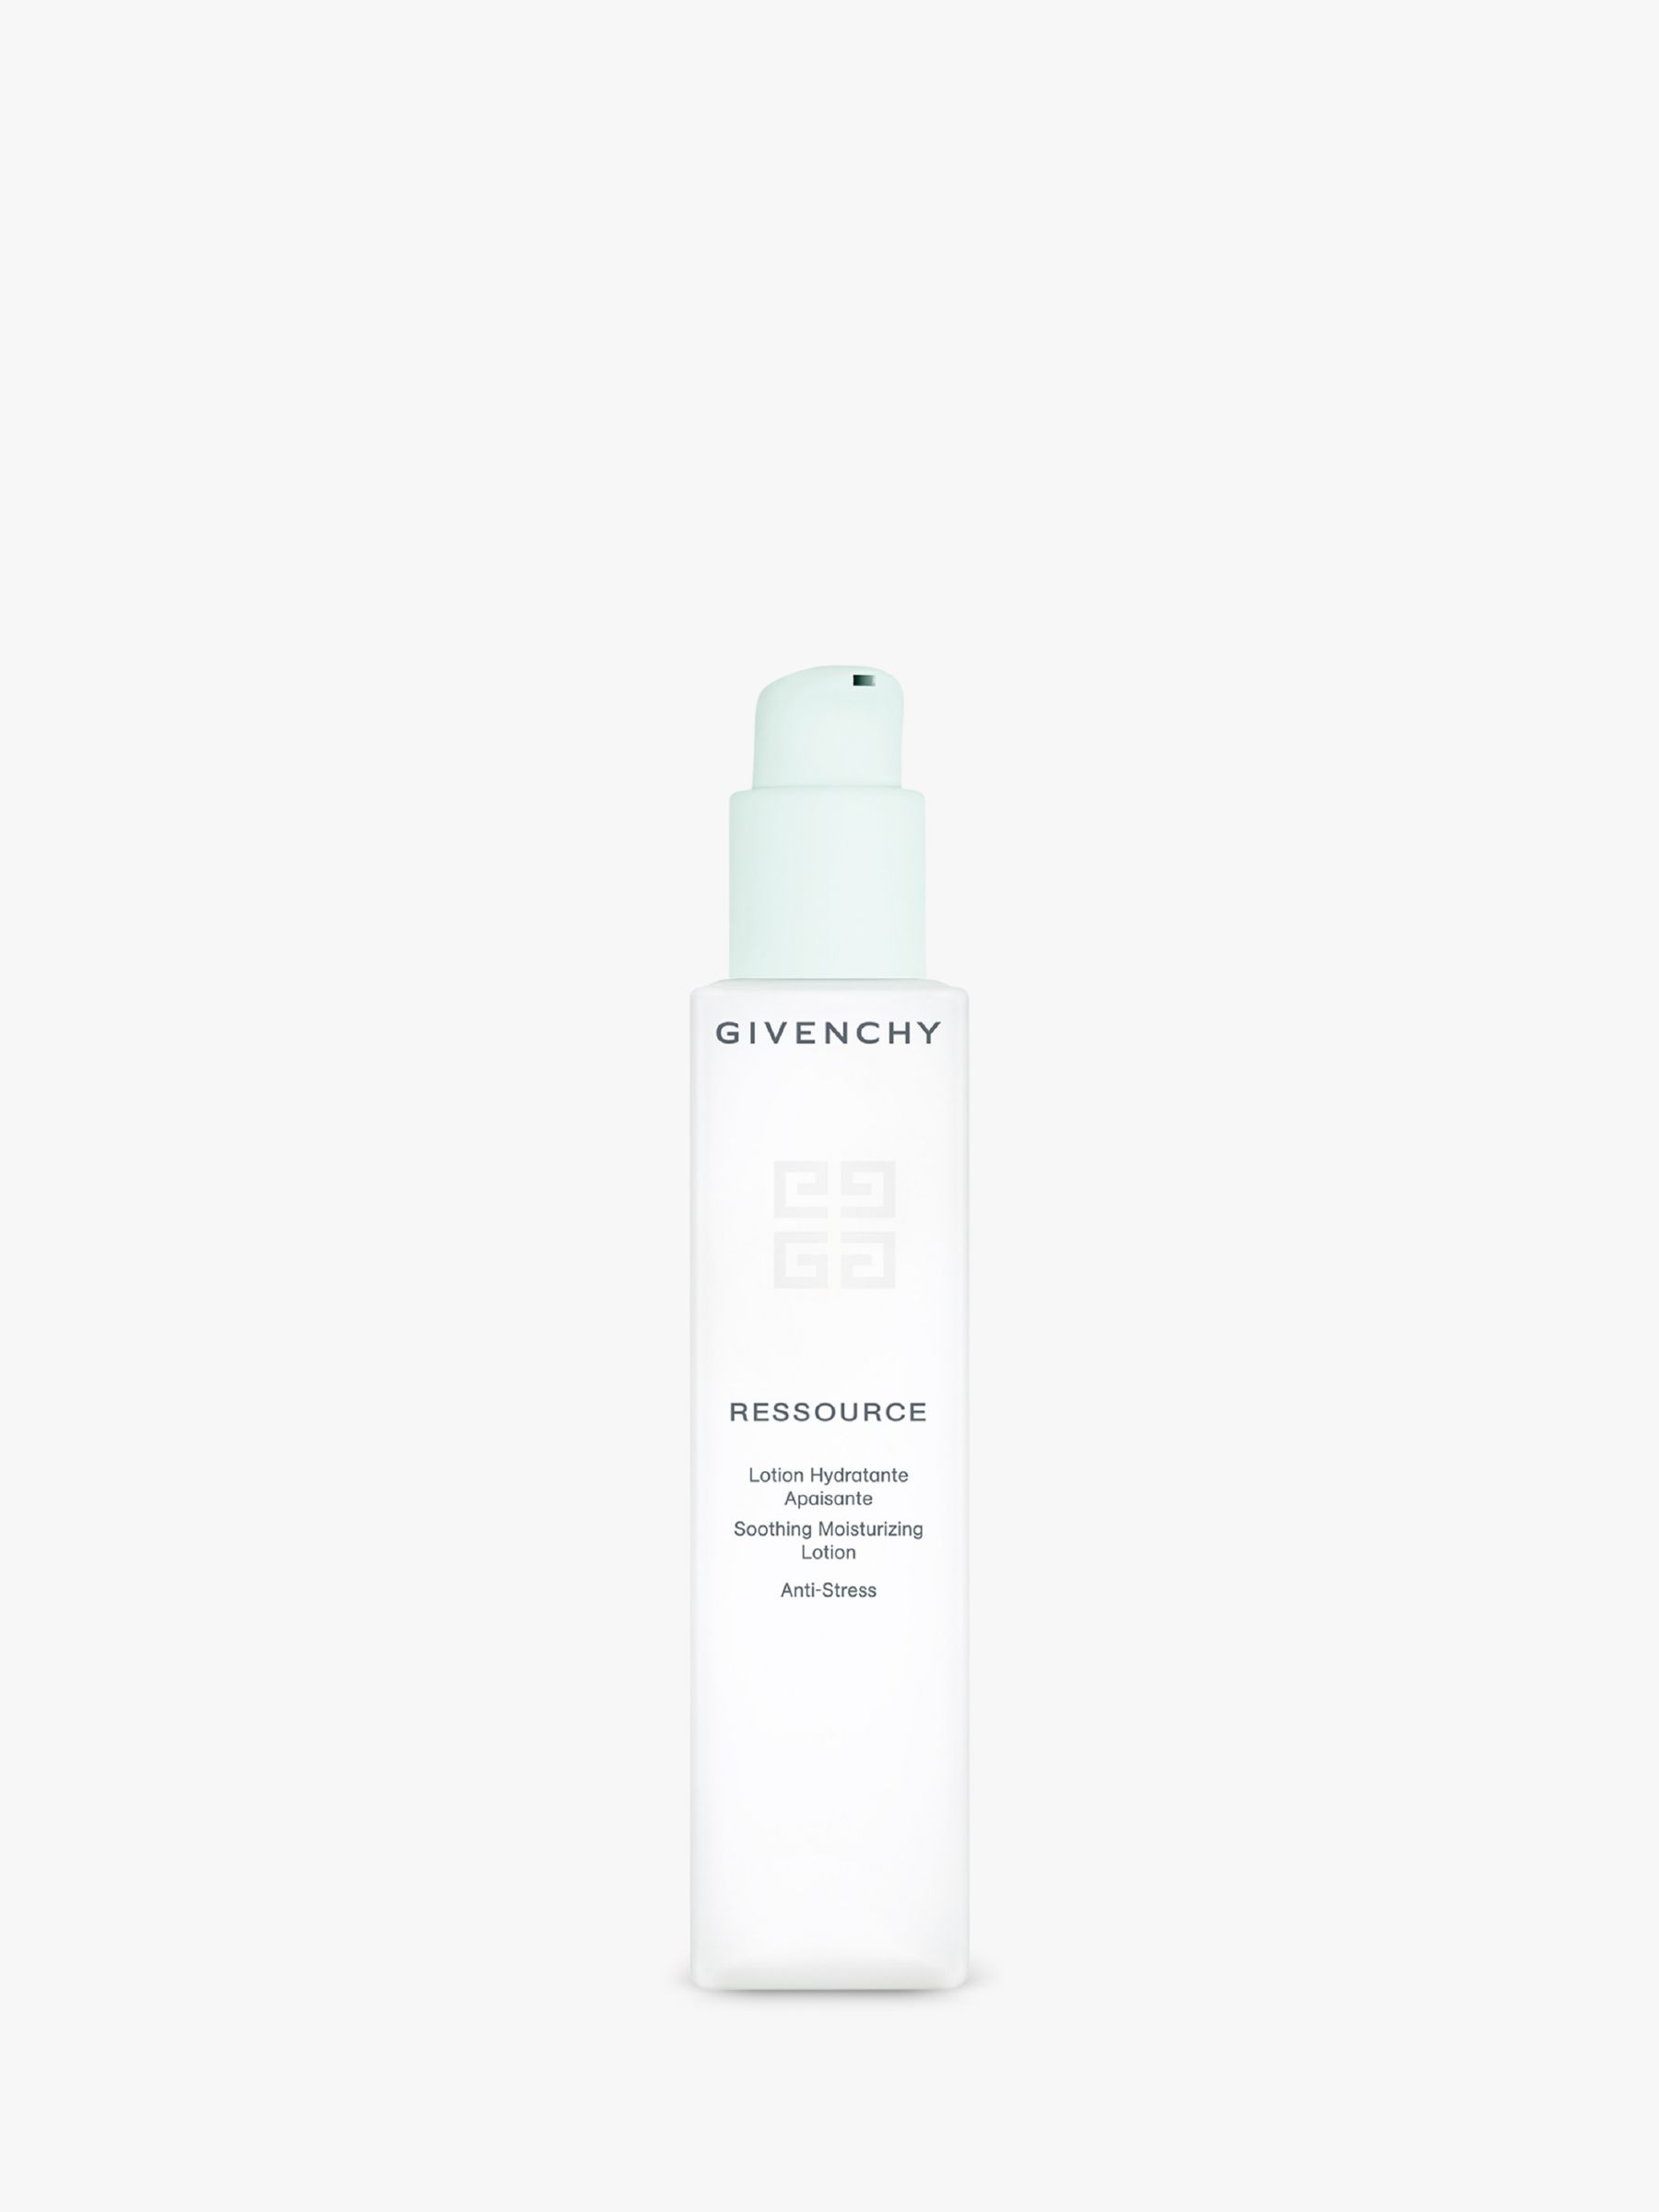 Givenchy Ressource Soothing Moisturising Lotion, 200ml